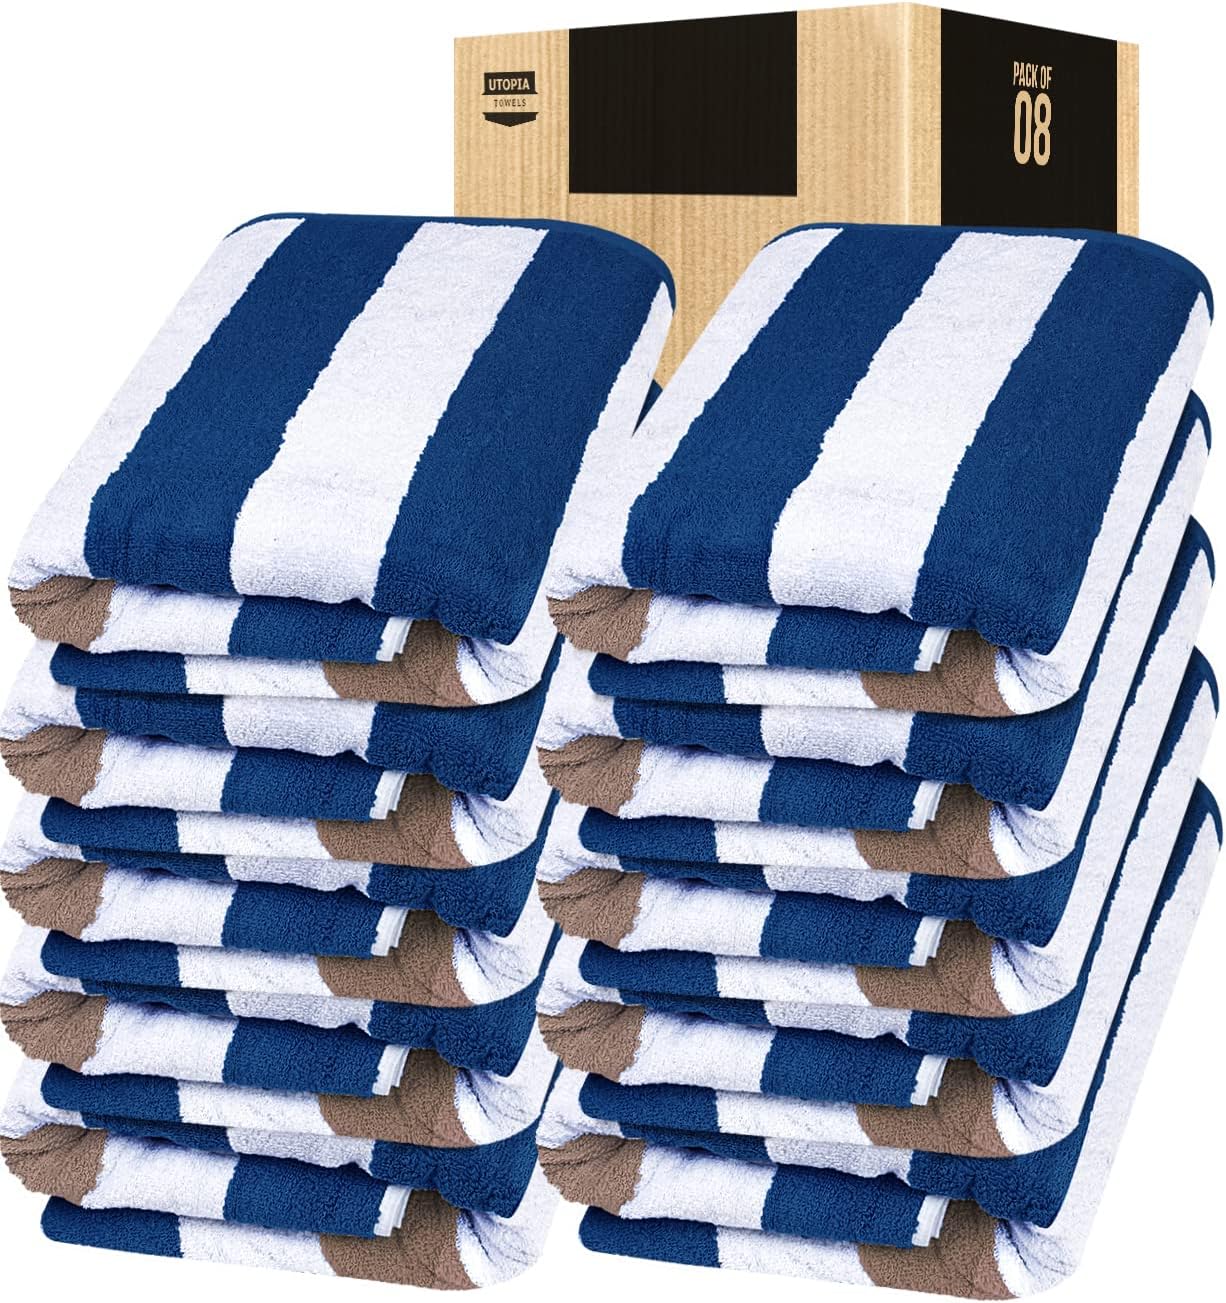 Utopia Towels Polycotton 300 GSM Beach Towel Set - Buy Utopia Towels  Polycotton 300 GSM Beach Towel Set Online at Best Price in India